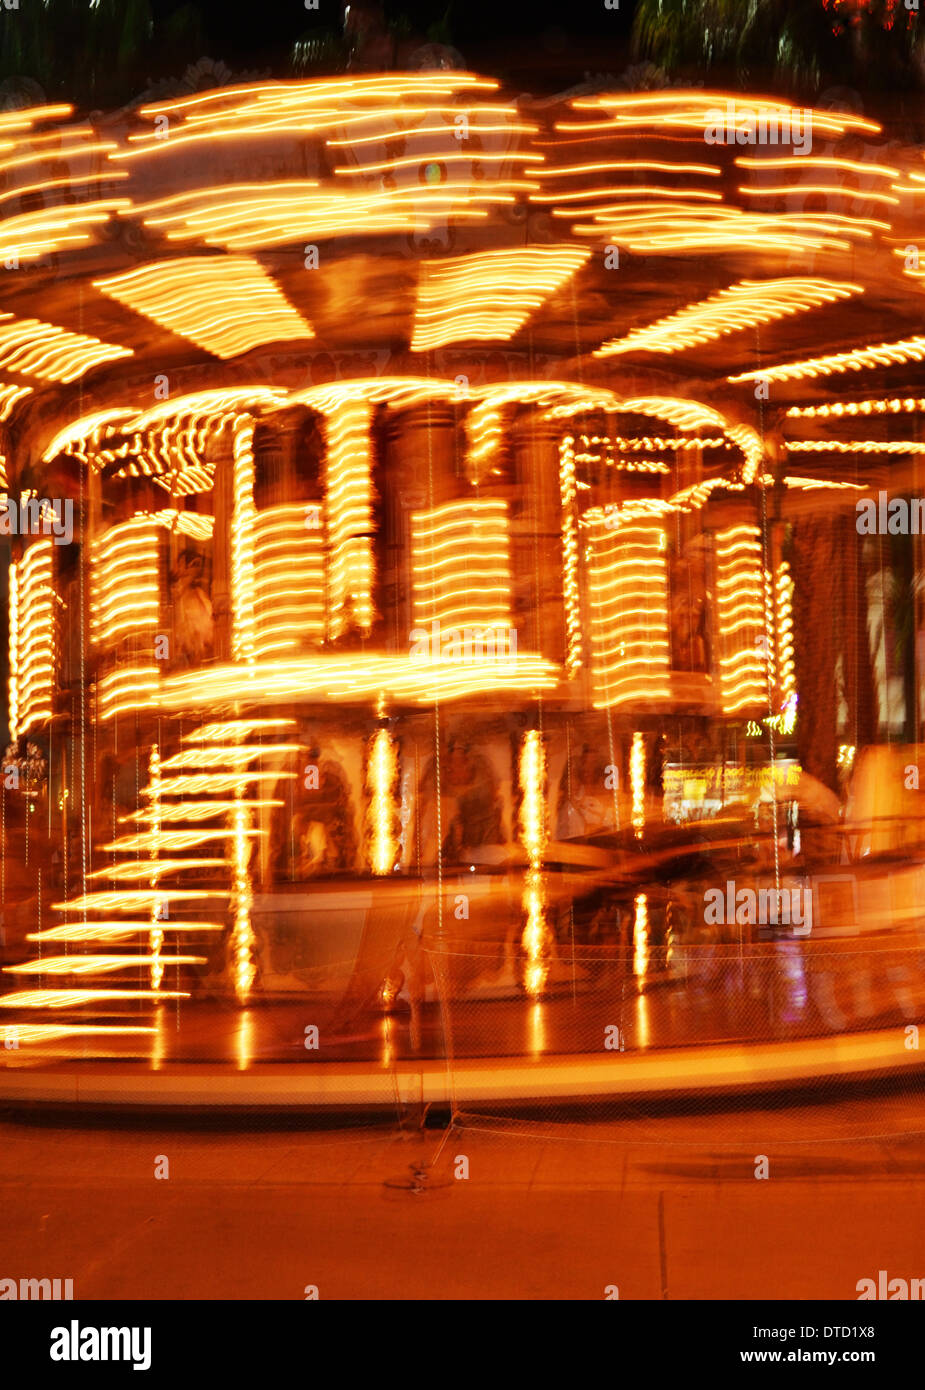 Old fashioned carousel Stock Photo